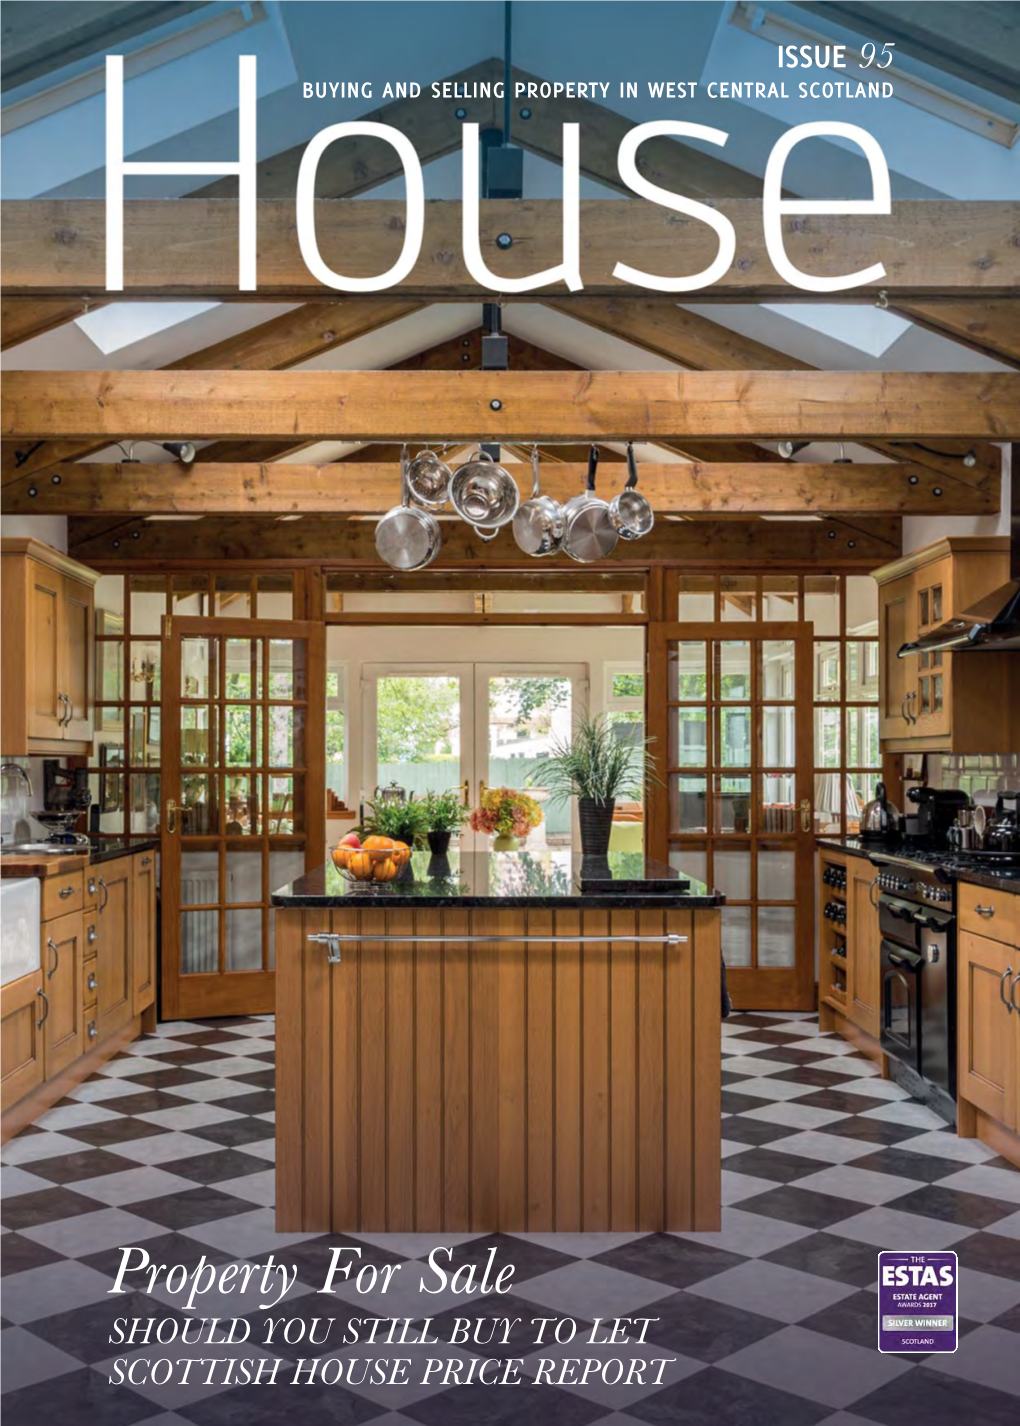 Property for Sale SHOULD YOU STILL BUY to LET SCOTTISH HOUSE PRICE REPORT Contents 5 WELCOME Our Introduction to House Magazine